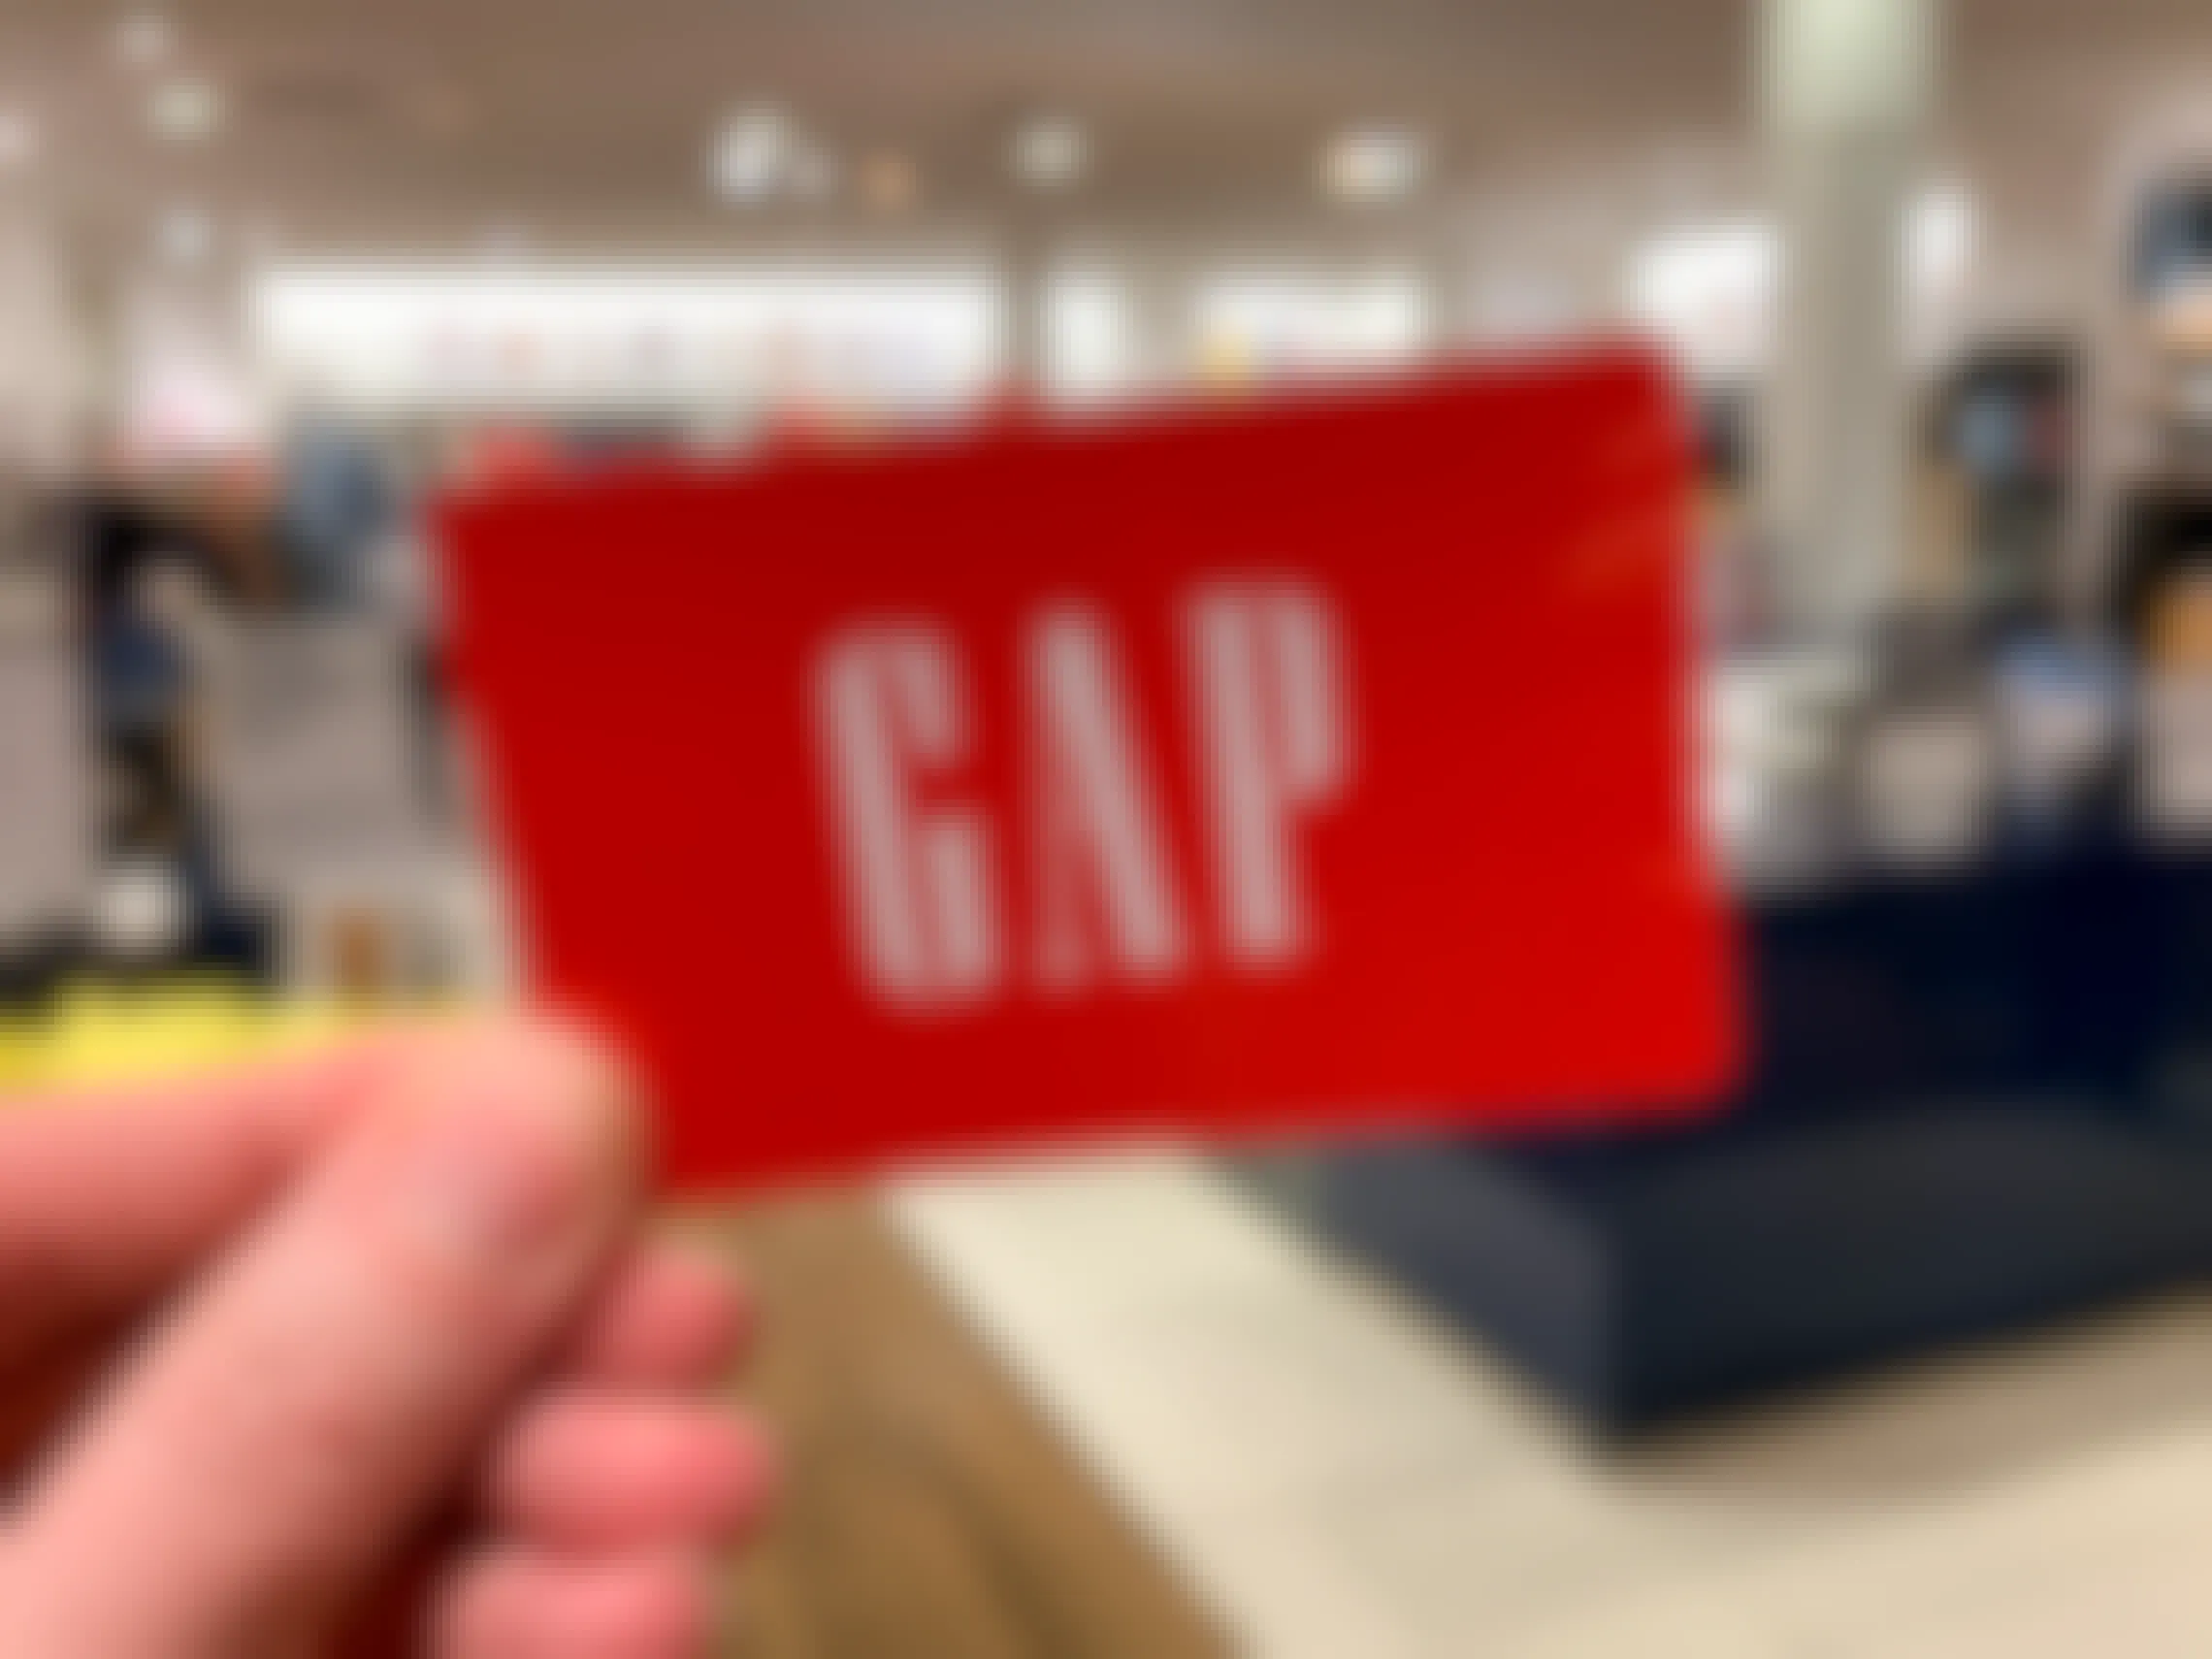 A red gap gift card in store.